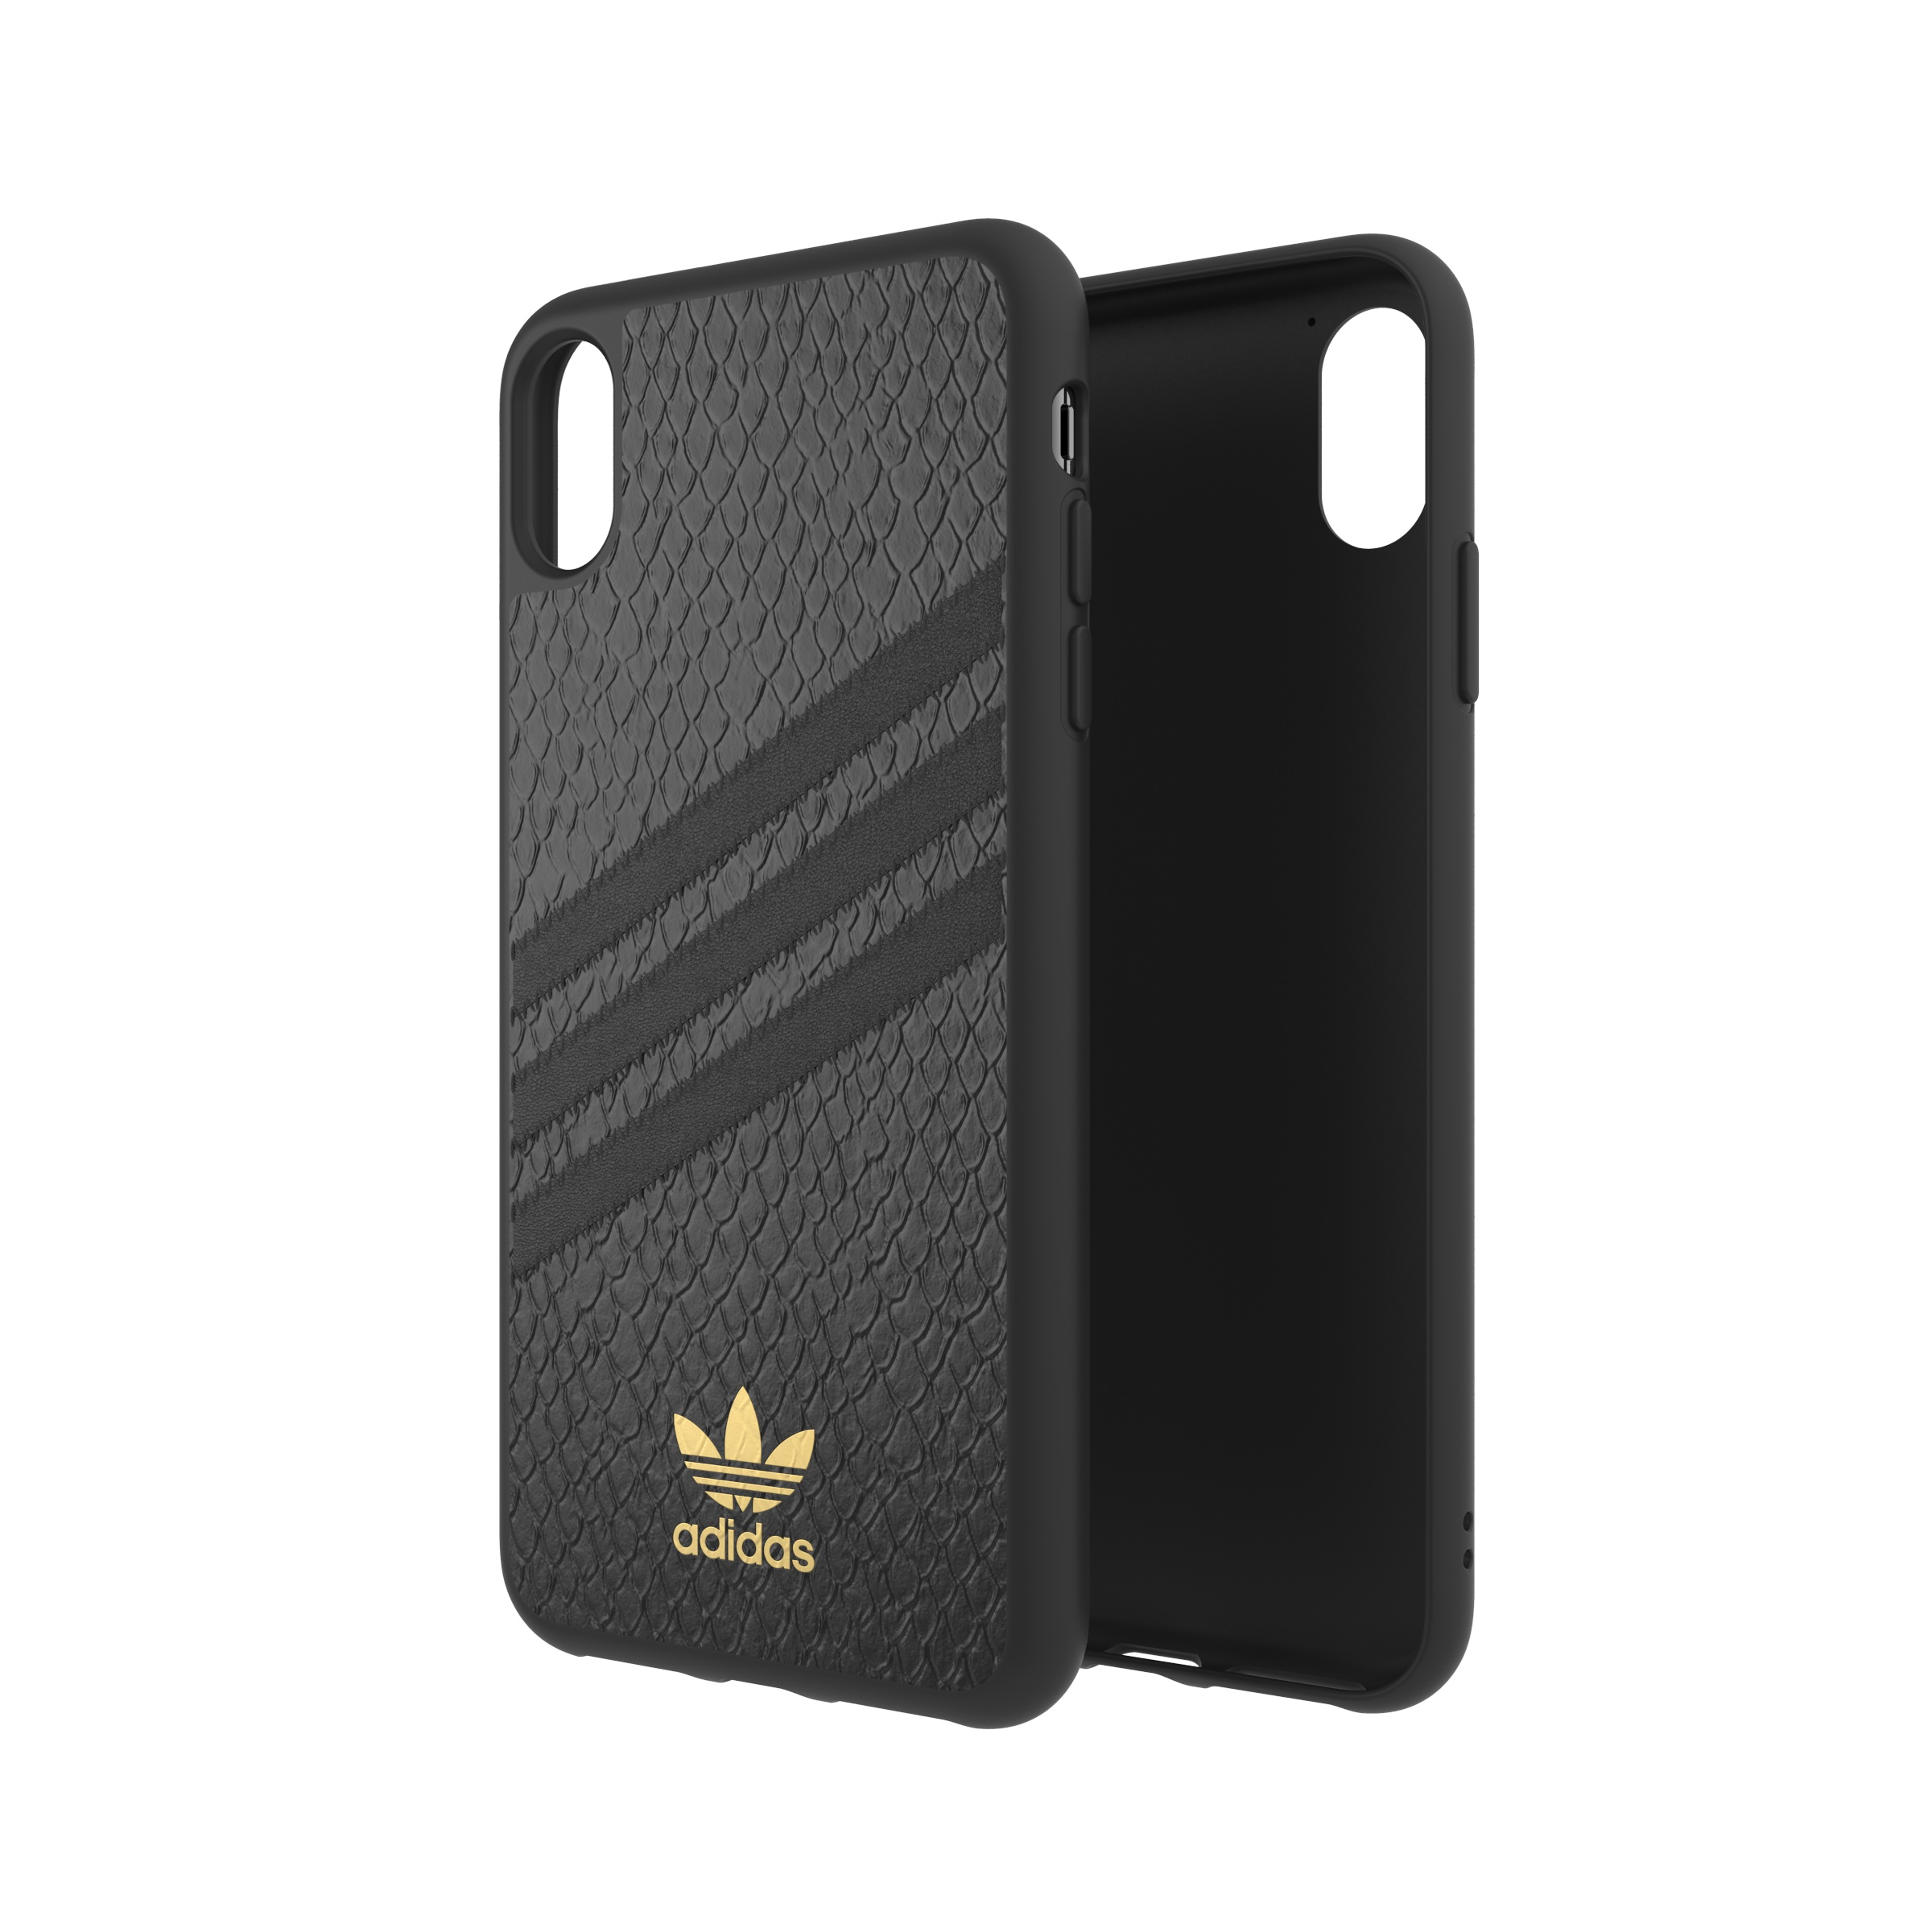 ADIDAS Moulded Case Backcover, XS BLACK MAX, APPLE, SNAKE, PU IPHONE